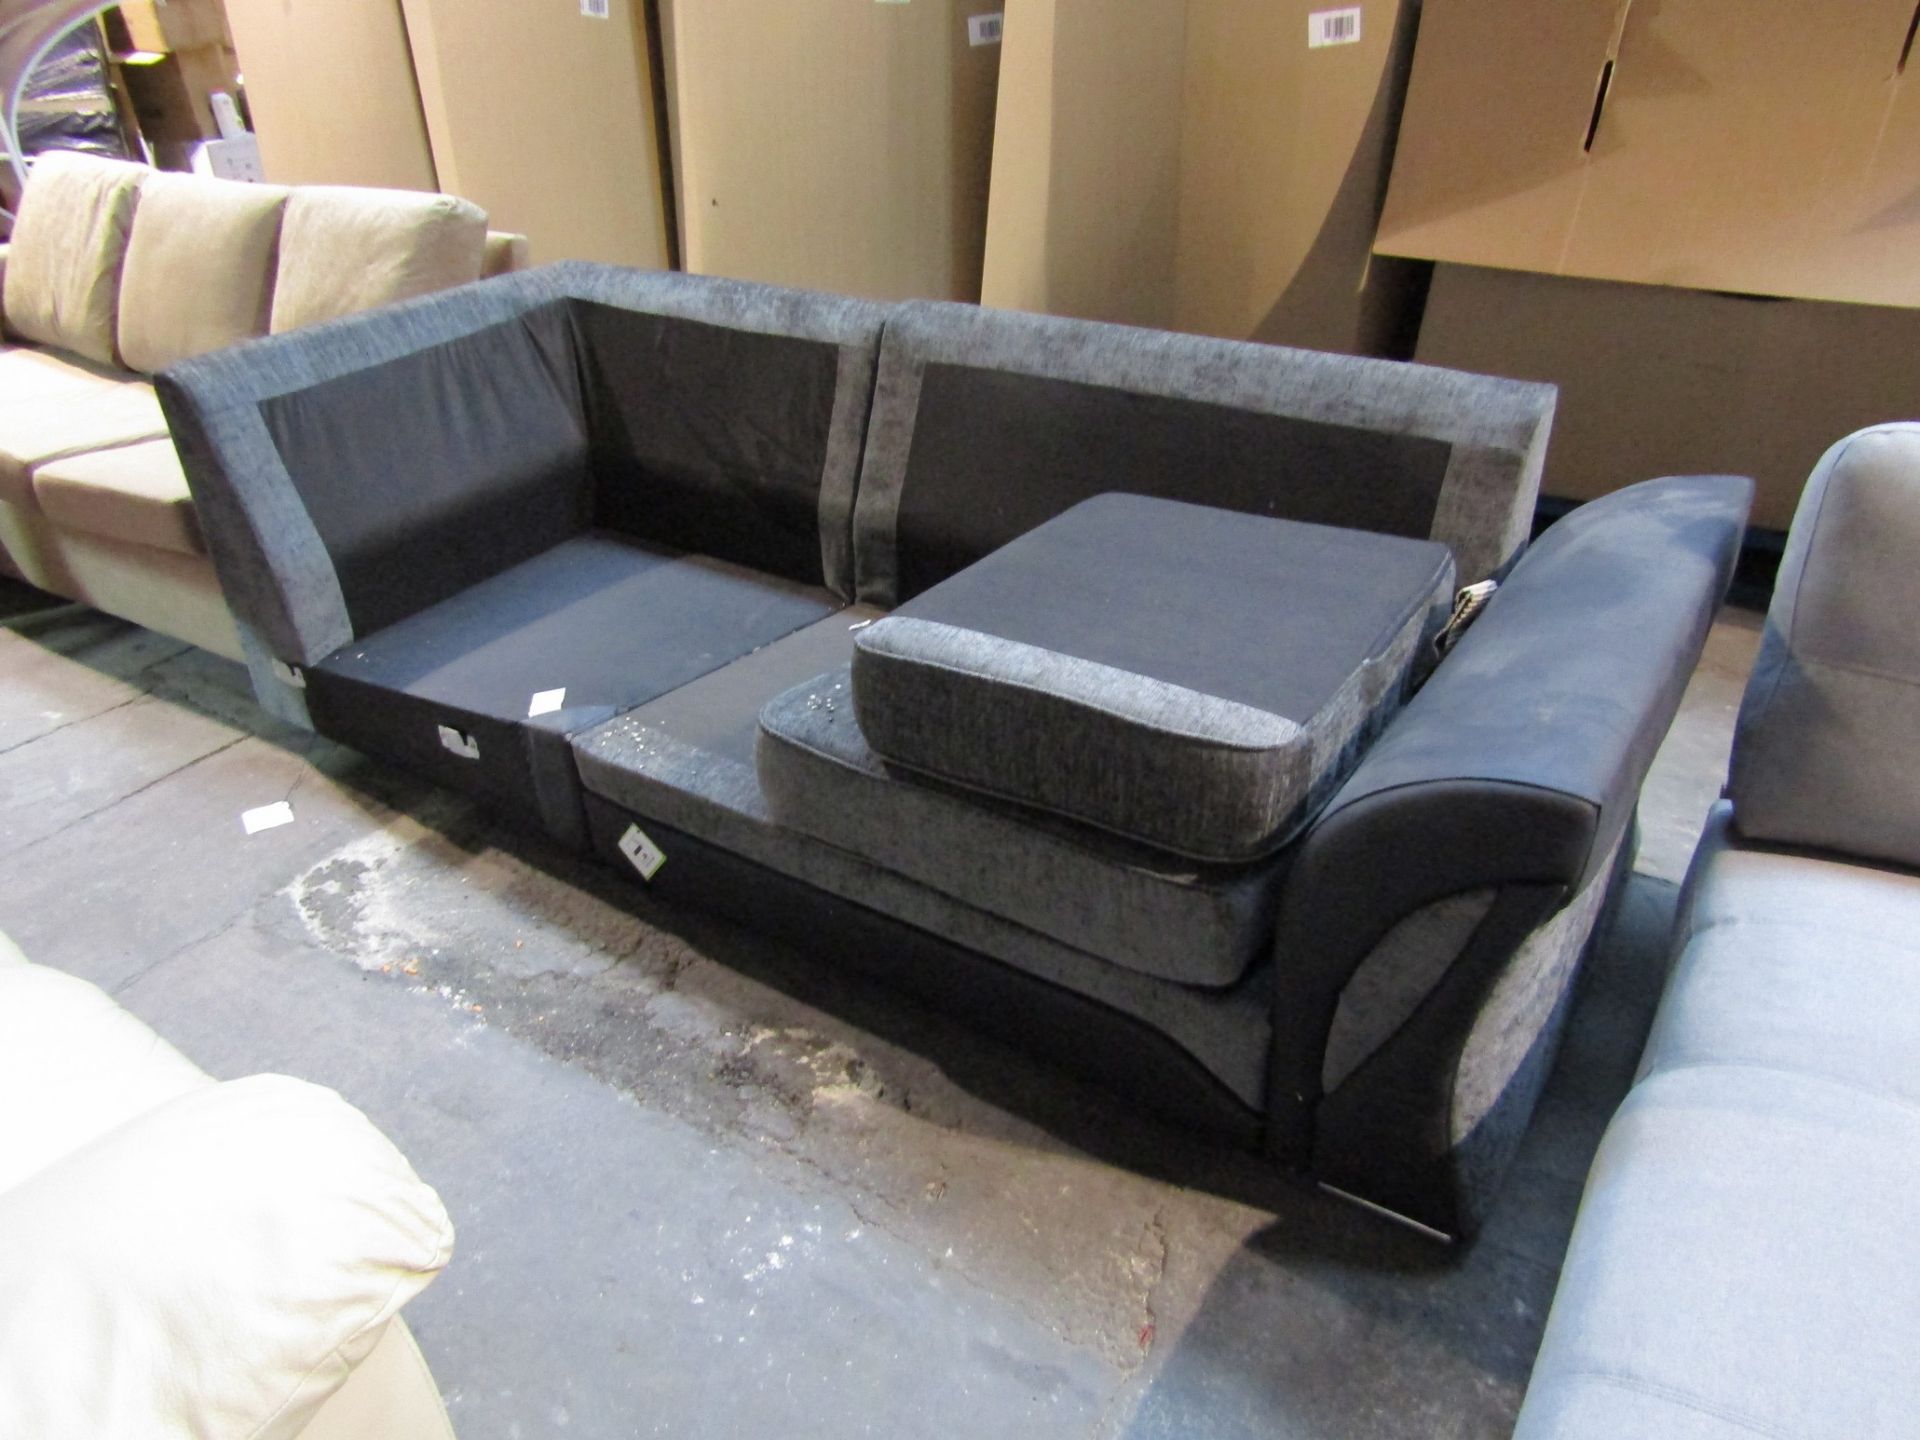 3 GREY AND BLACK SOFA SECTIONS